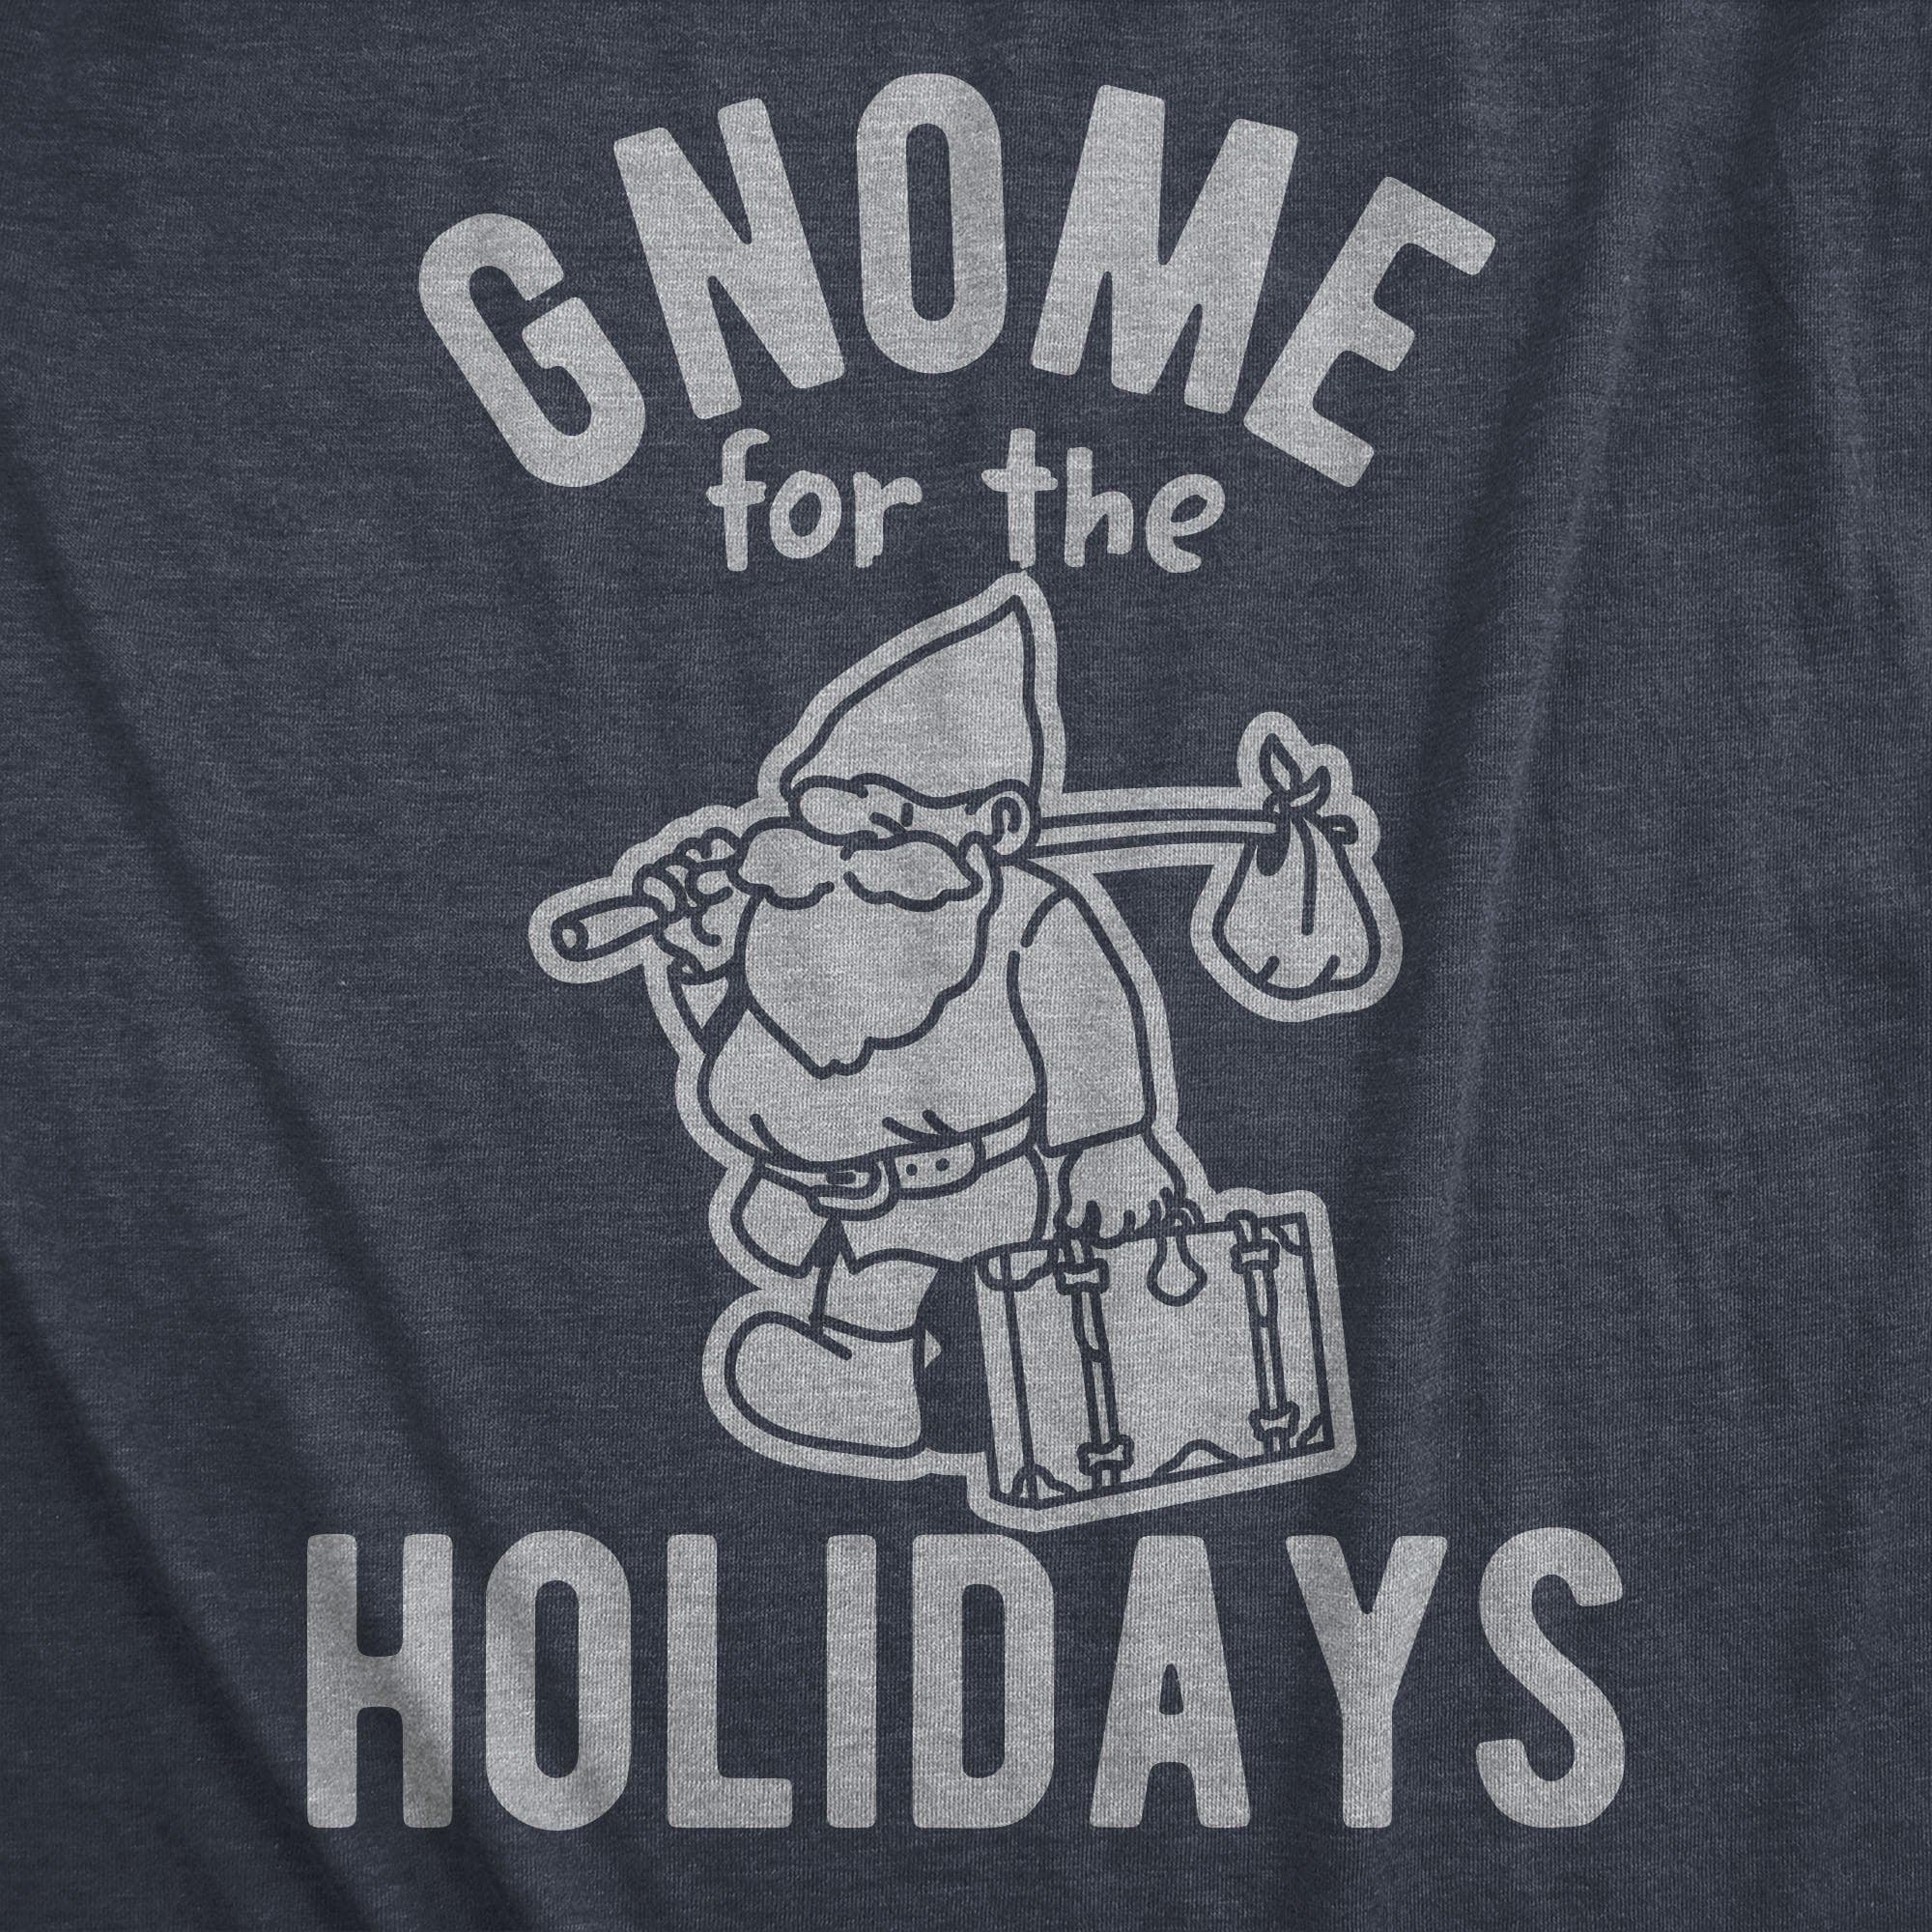 Gnome For The Holidays Women's Tshirt - Crazy Dog T-Shirts